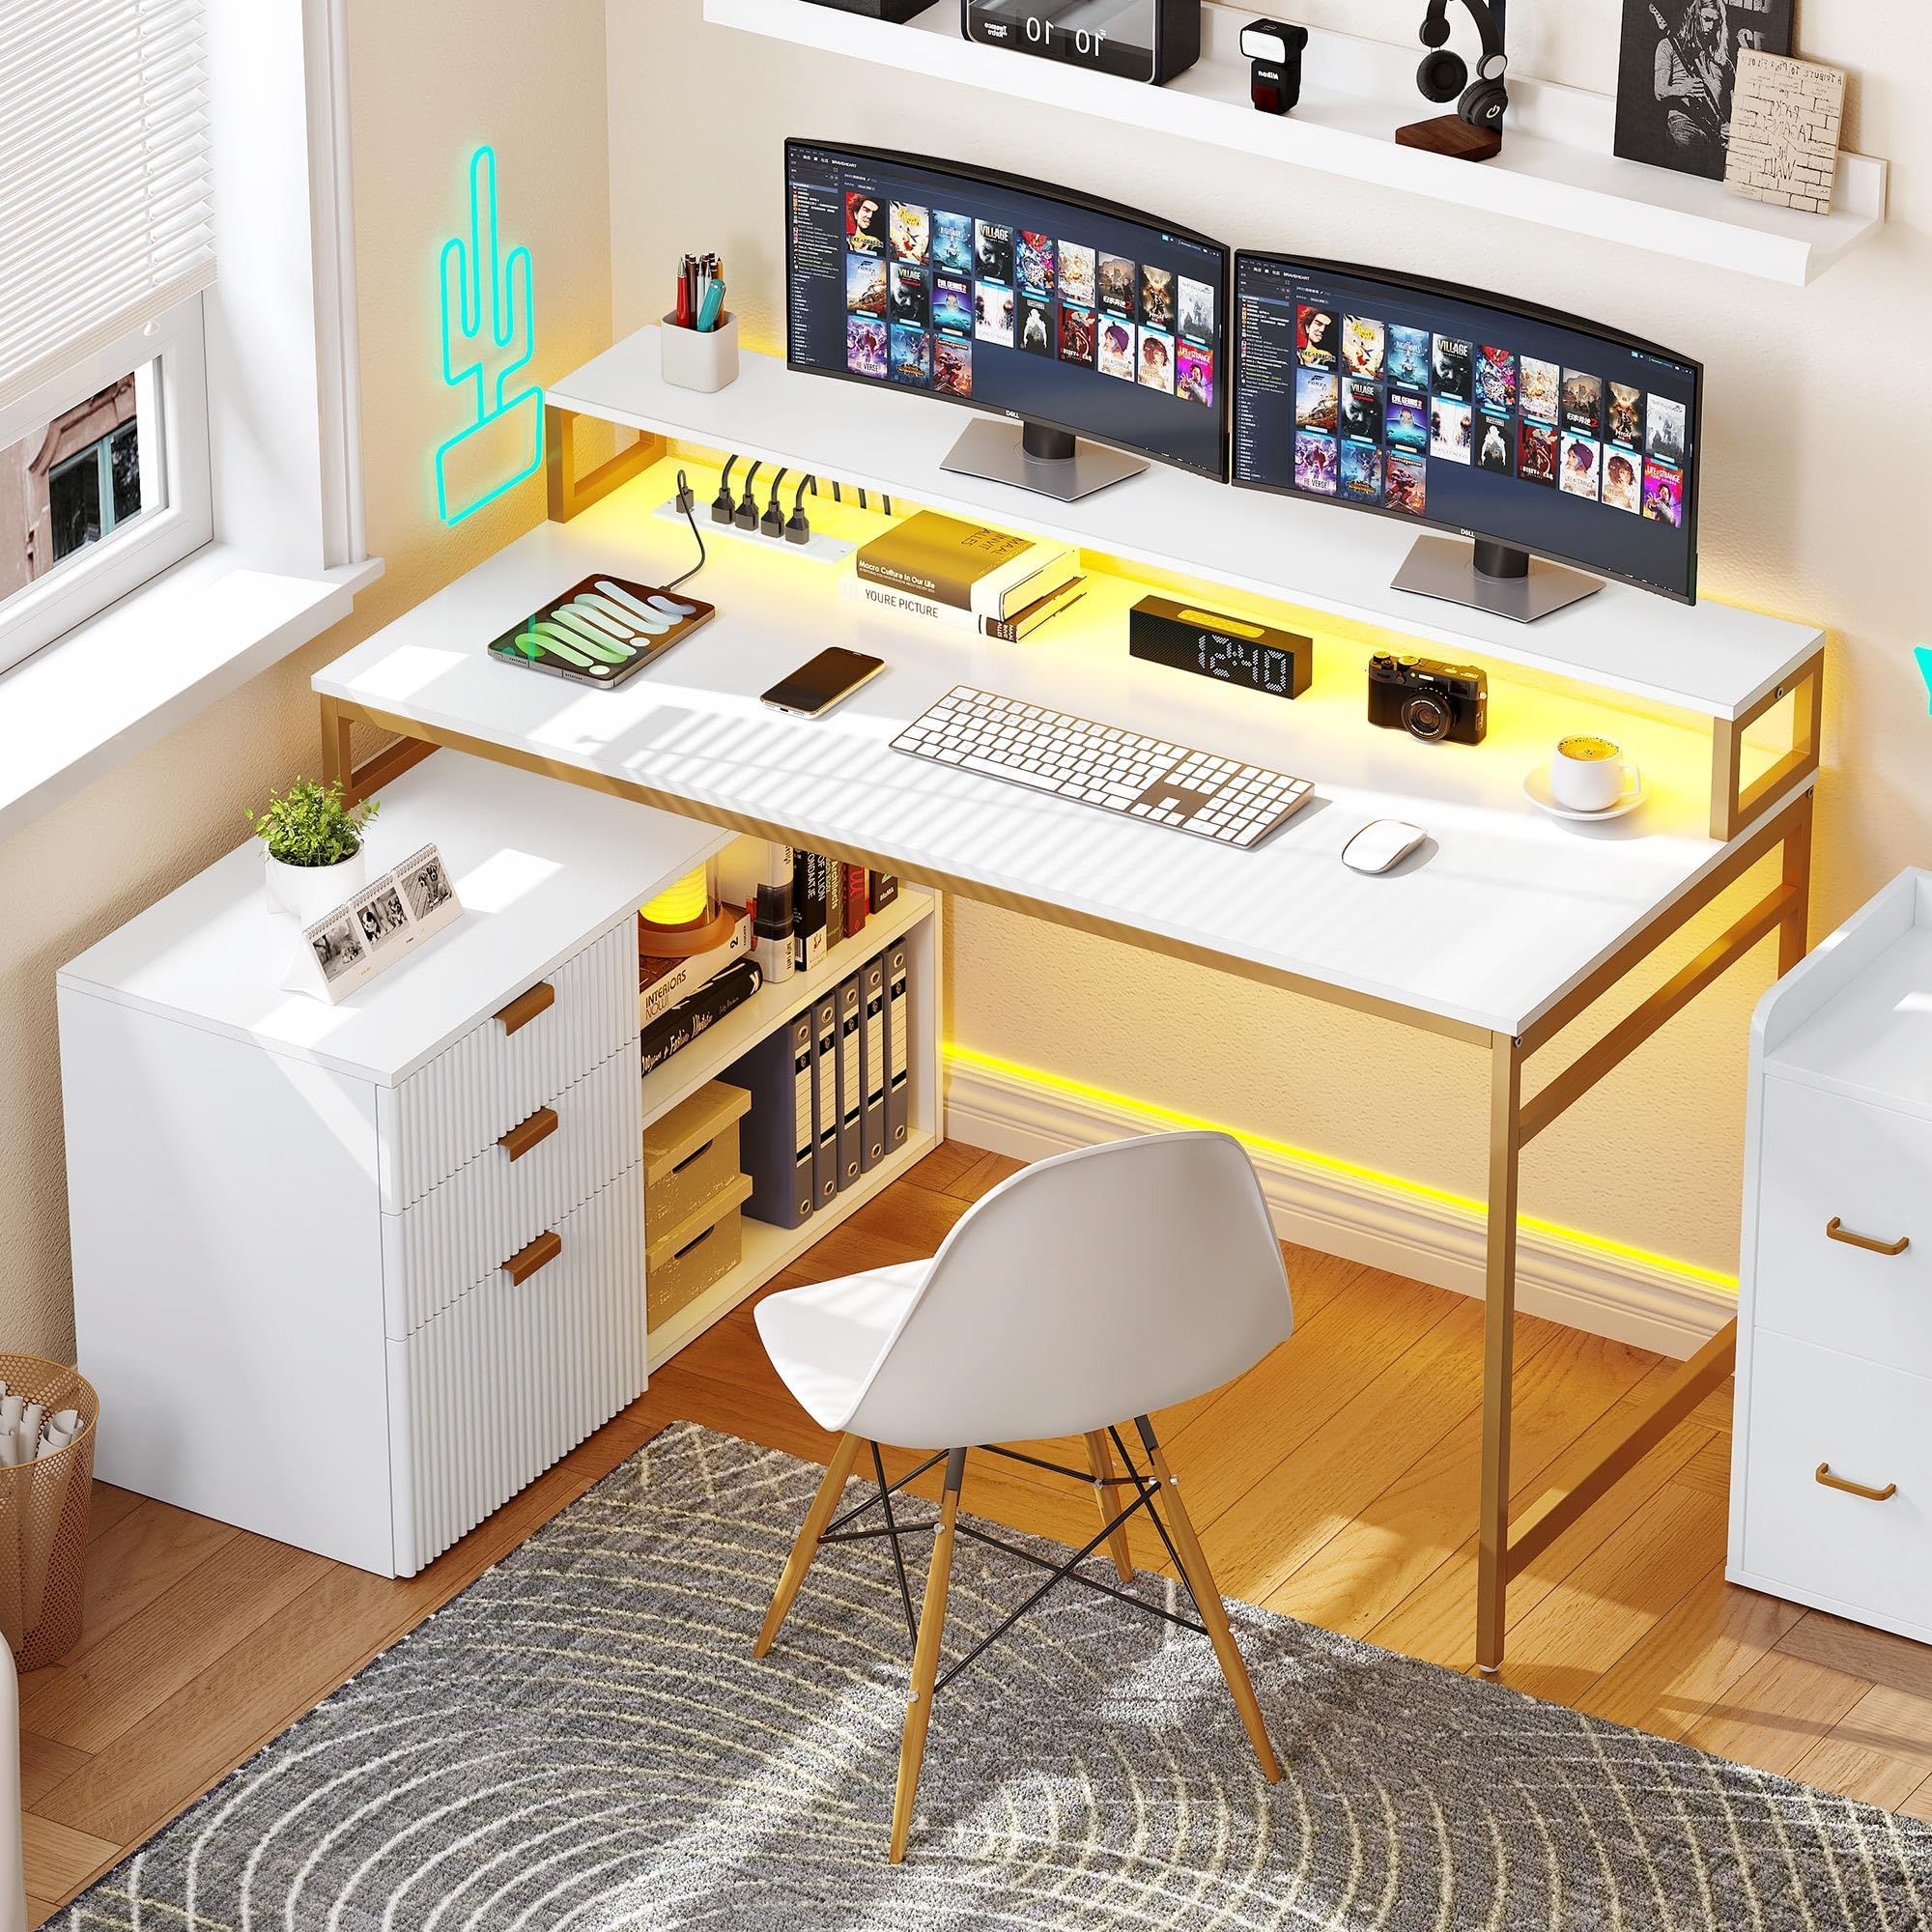 The Versatile L Shaped Computer Desk: A Functional and Stylish Workspace Solution